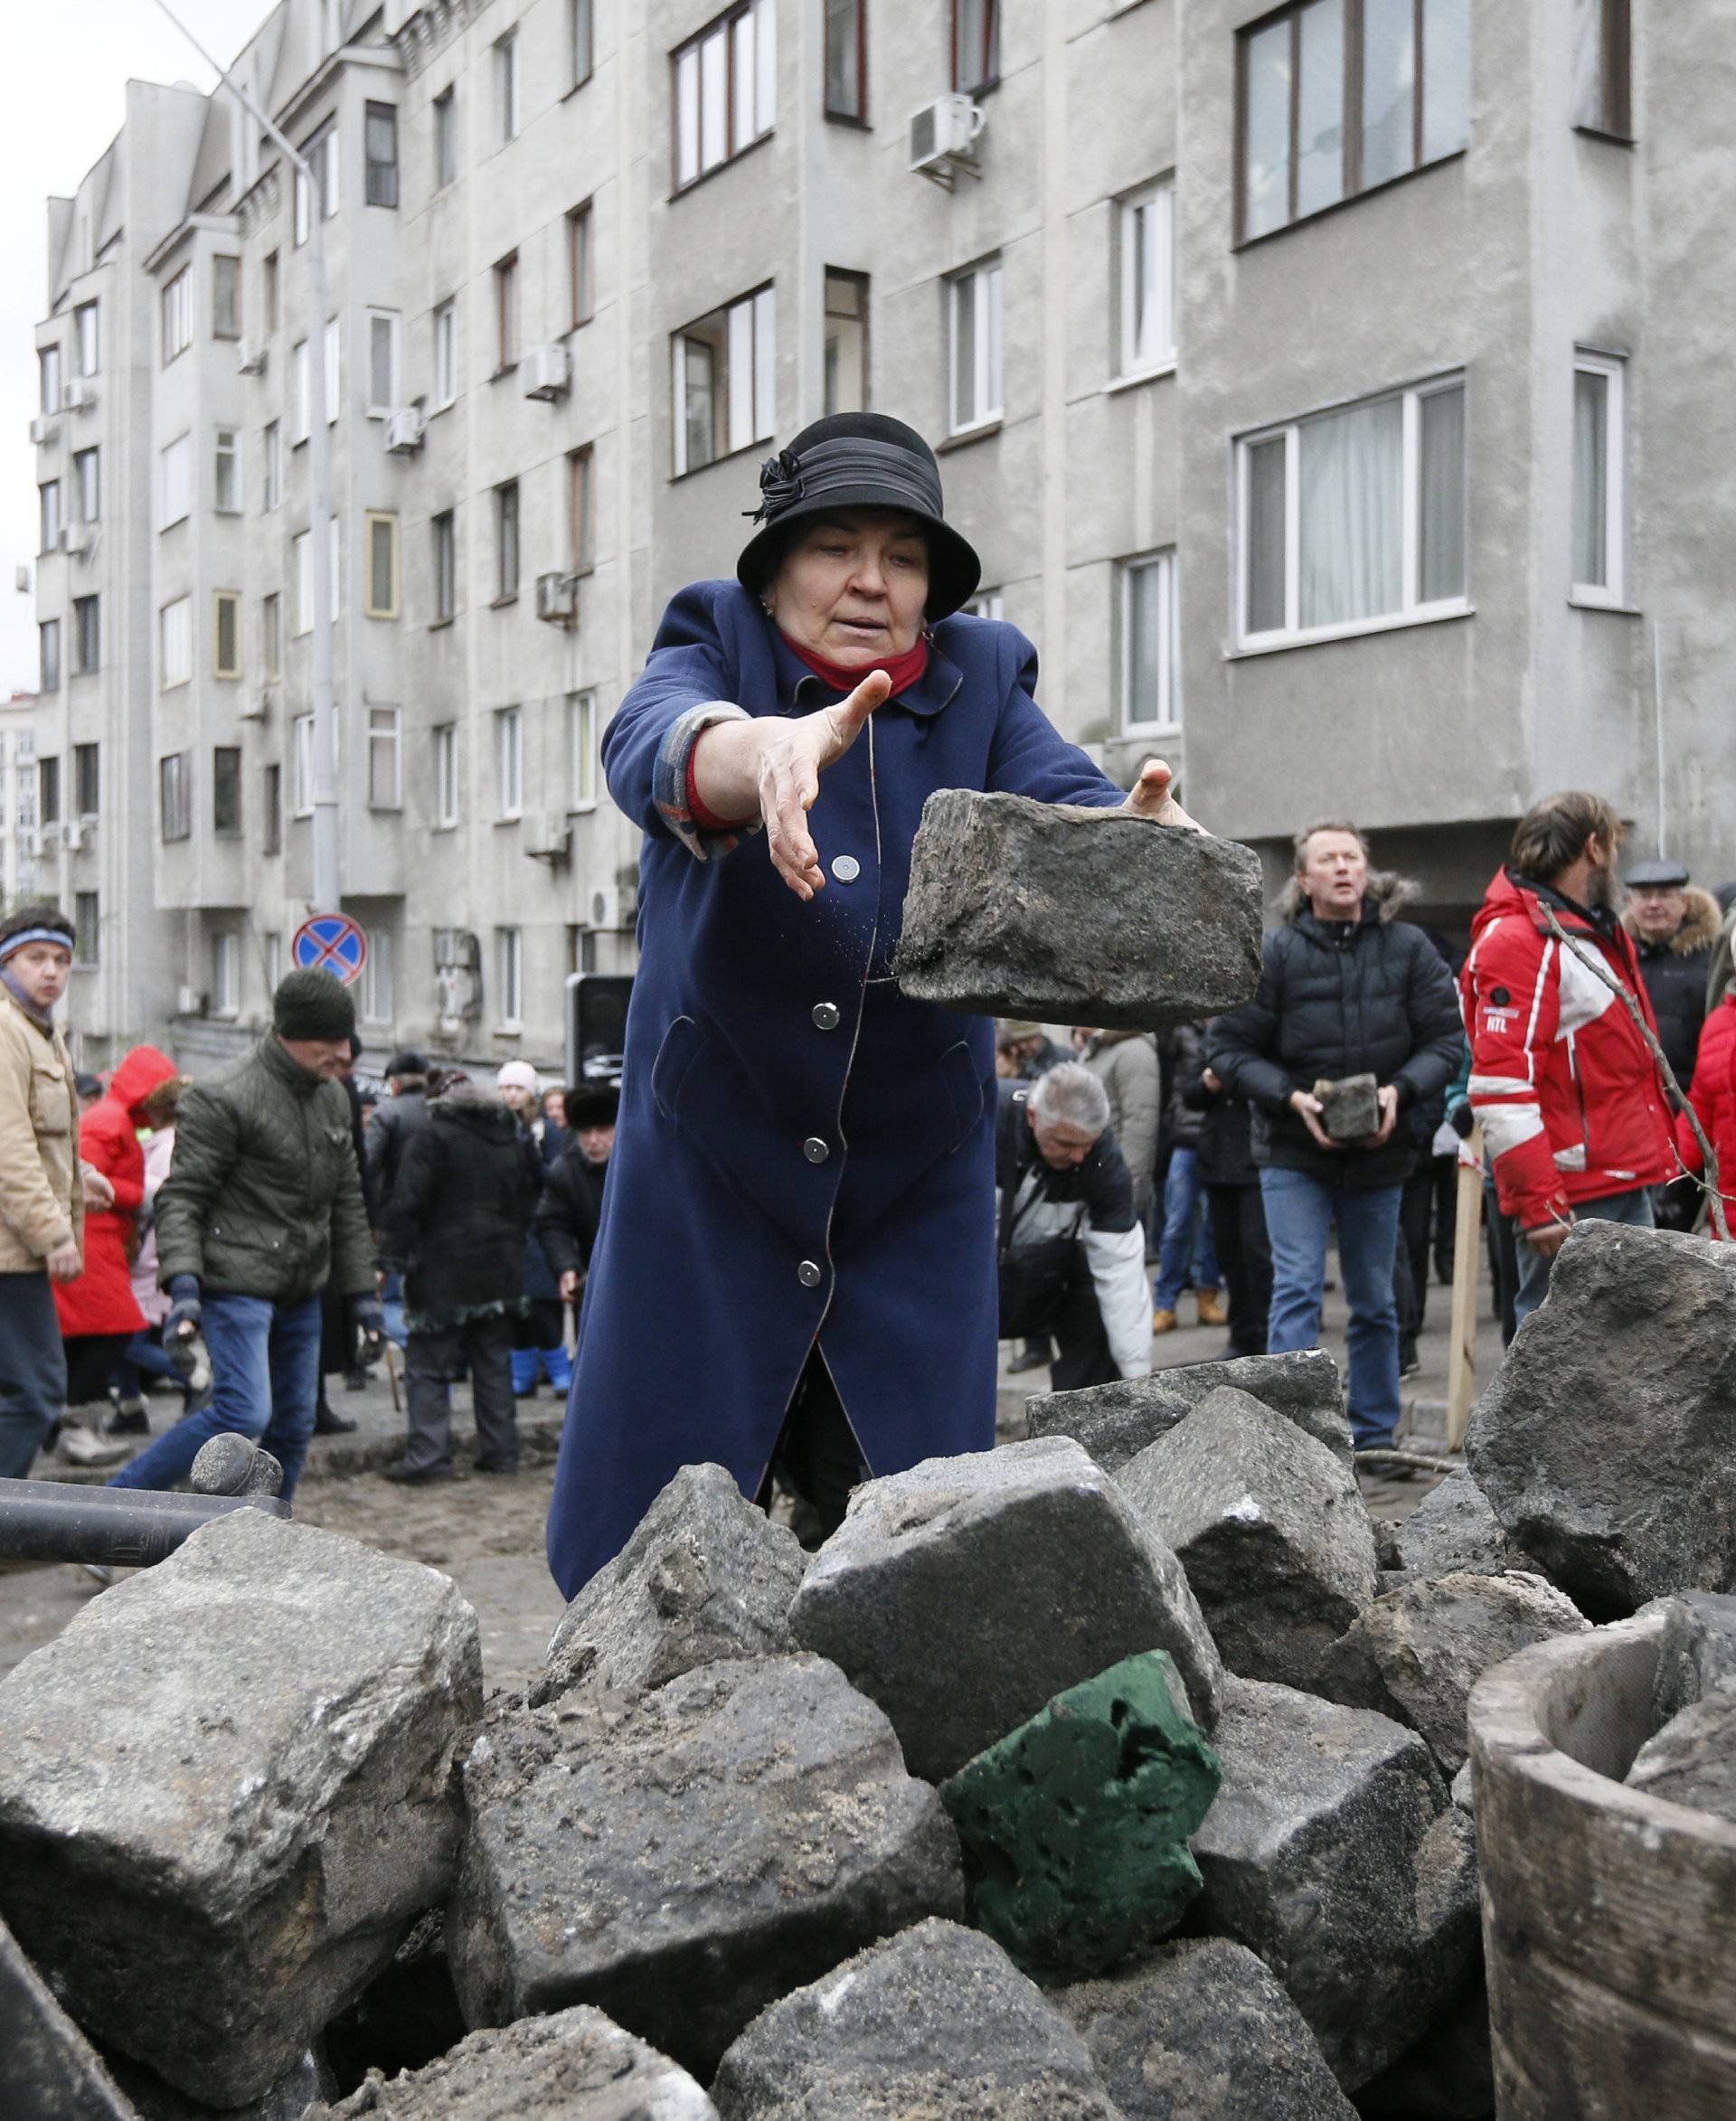 Supporters of Georgian former President Mikheil Saakashvili move paving stones during clashes with police in Kiev